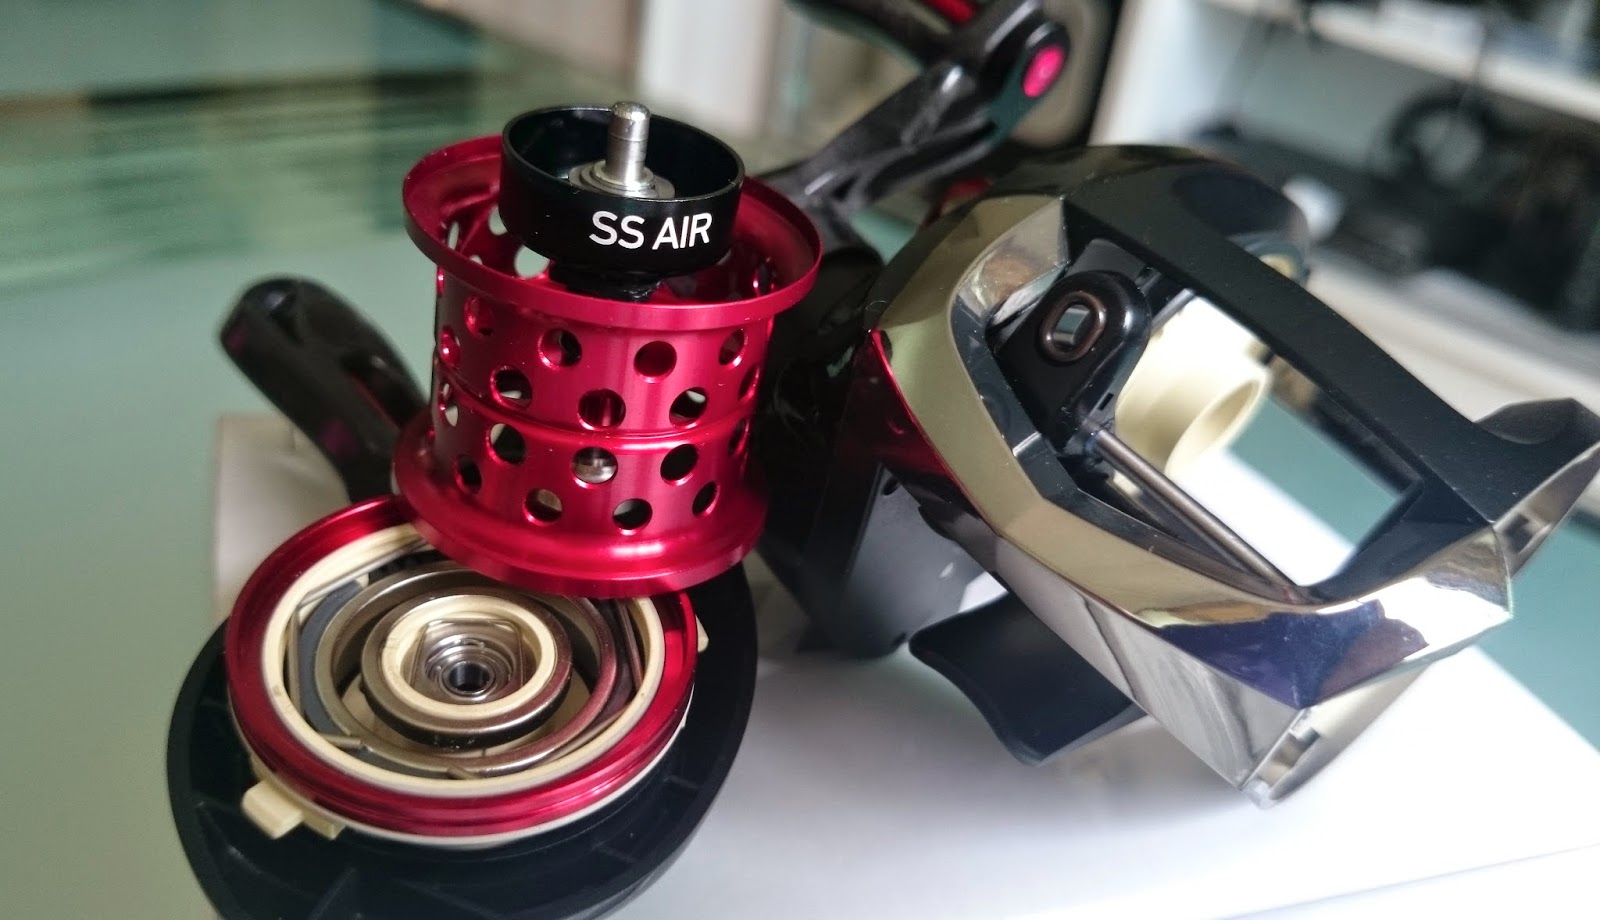 LURE × STYLE: Let's take a look: The Daiwa SS Air 8.1R